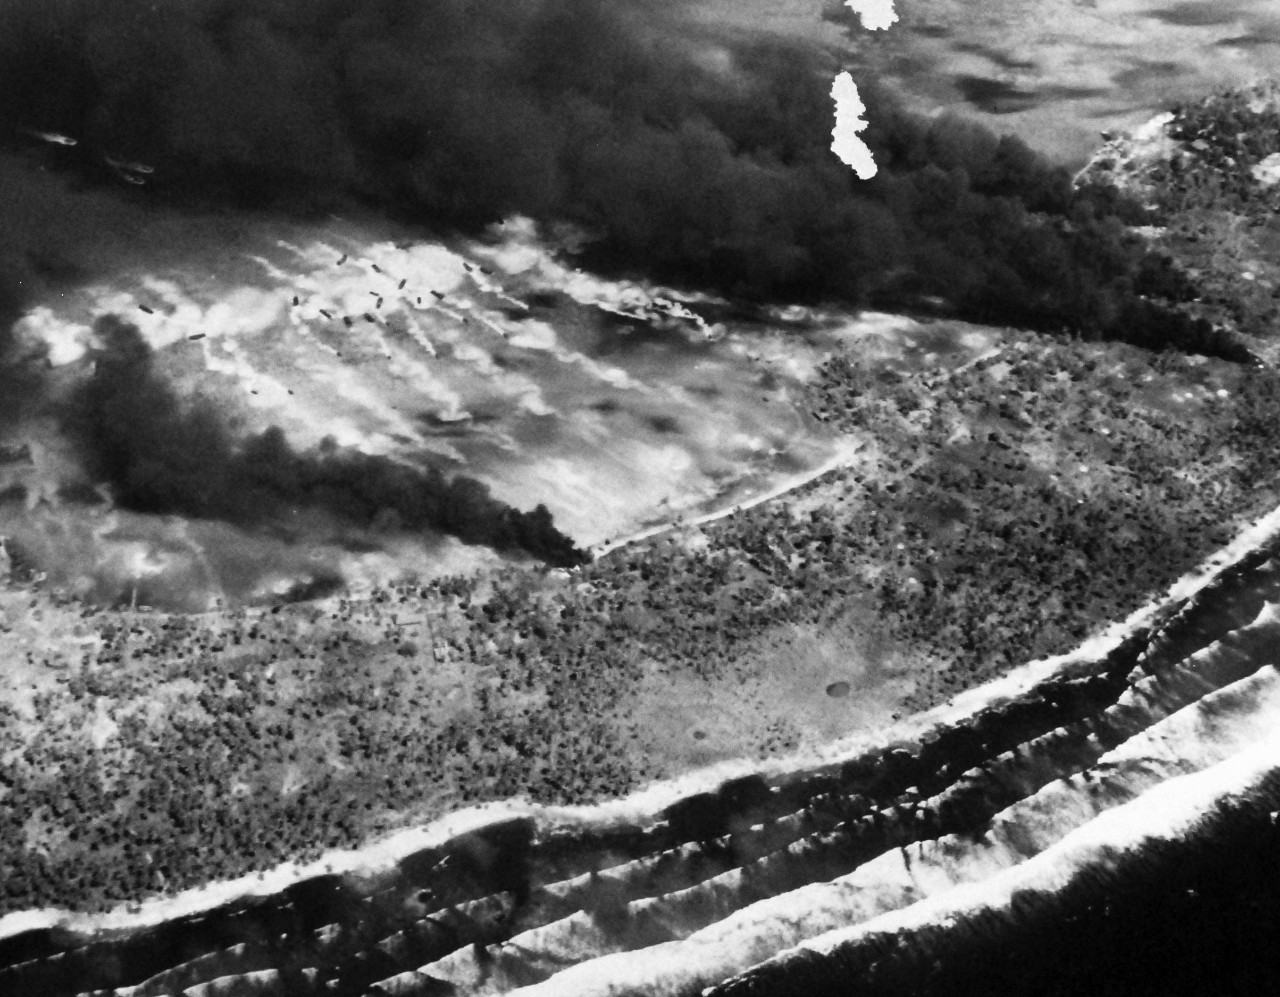 80-G-204716:  Operation Galvanic, November 1943.      Oblique of damage done to enemy positions on Makin Island, Gilbert Islands by bombing and bombardment, 20-21 November 1943 by U.S. forces.   Shell or bomb craters, old hulks, house, revetments.  Smoke from four bomb hits partially hiding the boats.  350 degrees.   Official U.S. Navy Photograph, now in the collections of the National Archives.  (2013/09/19).